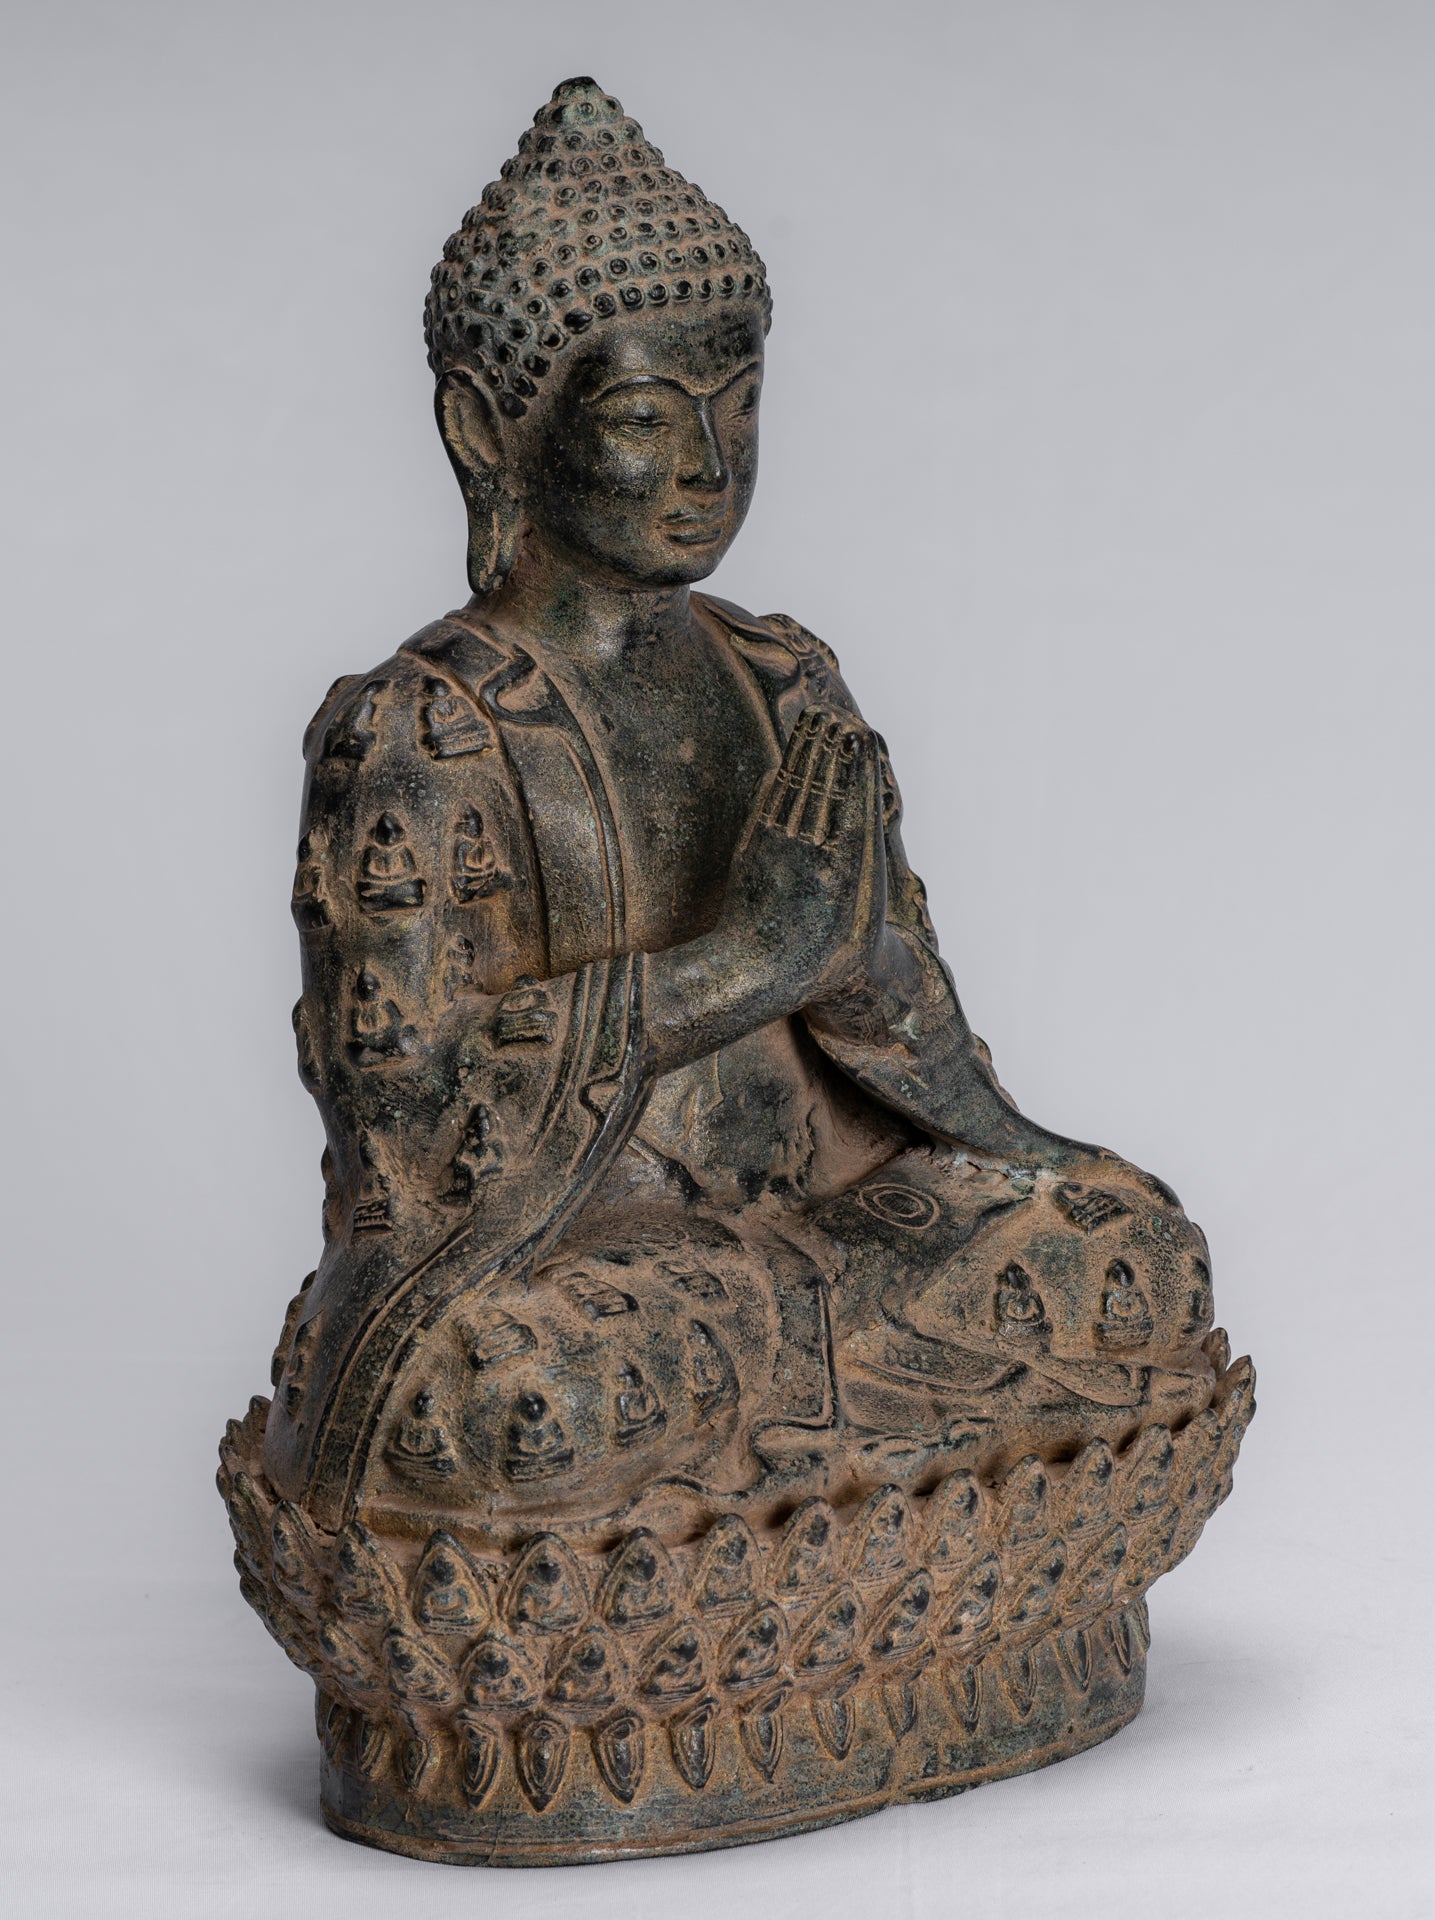 Seated Lotus Position Indian Buddha Statue